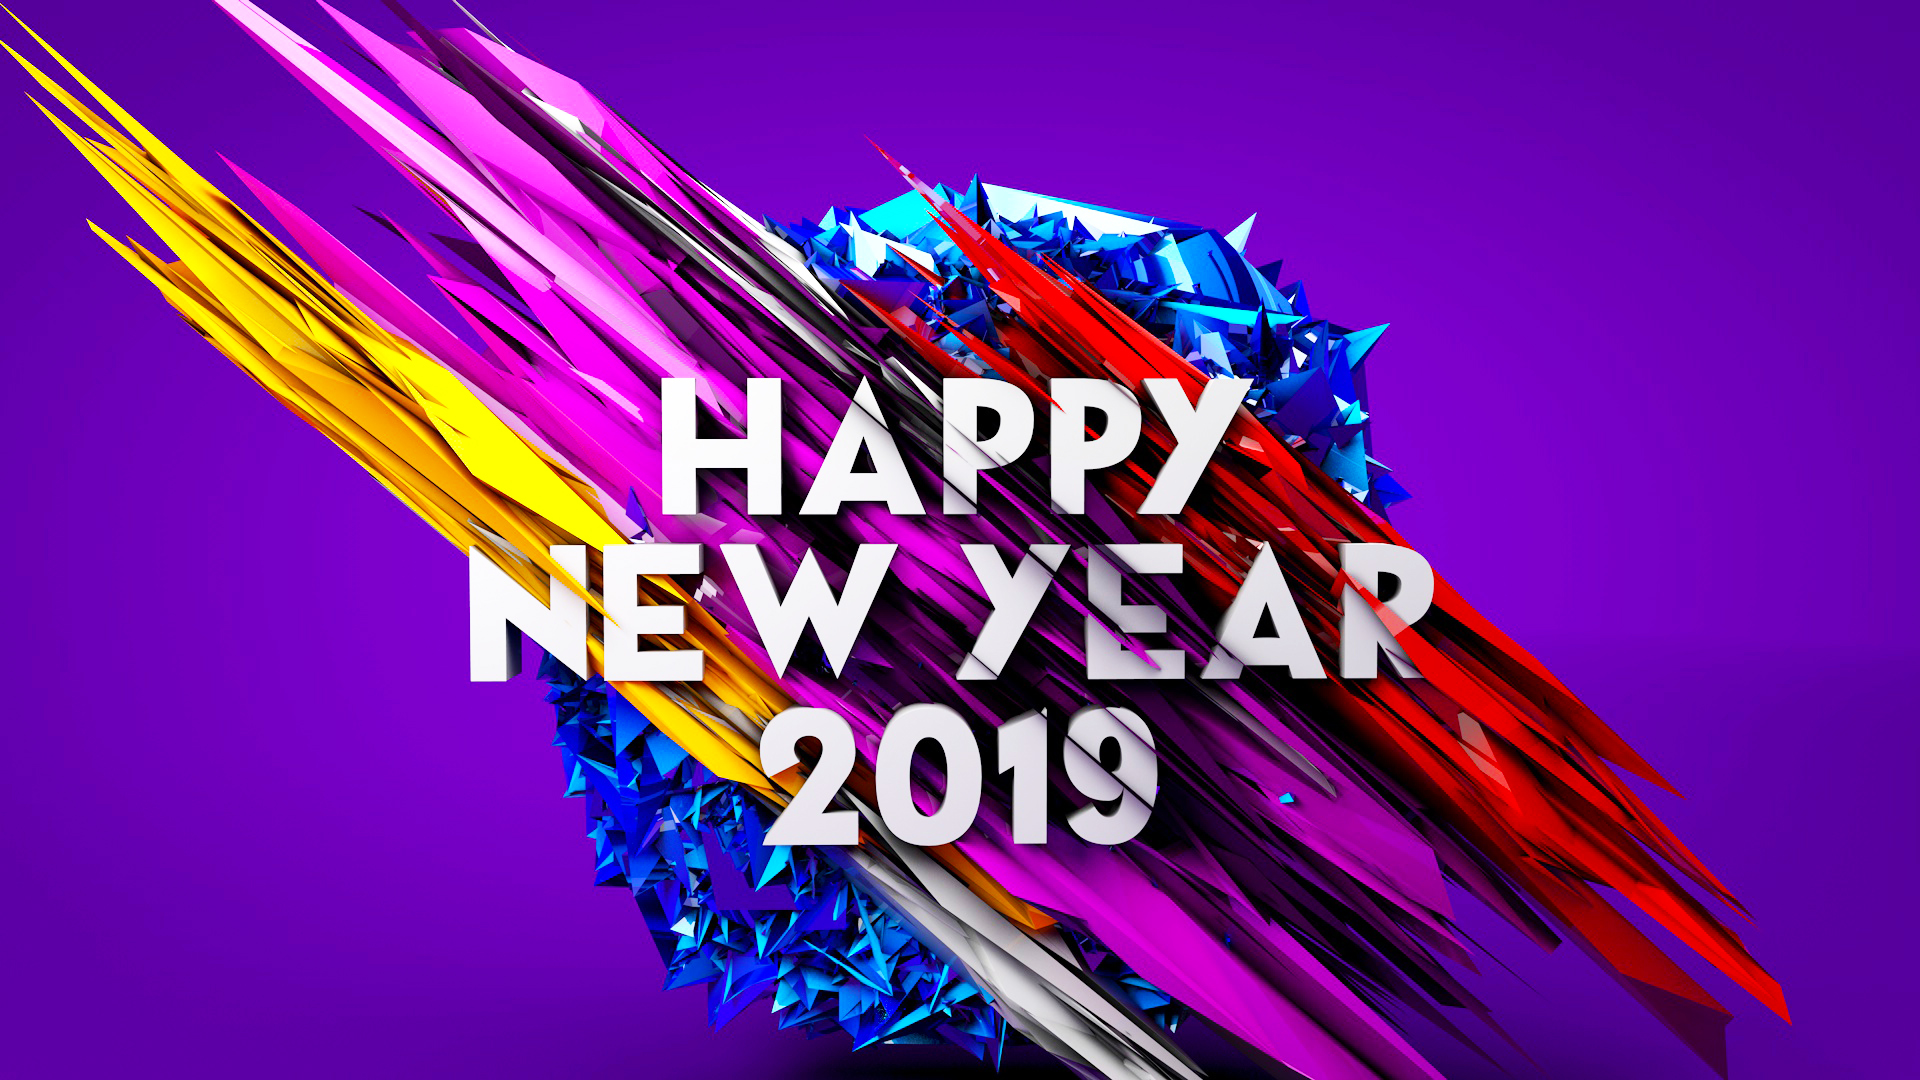 C4D Tutorial – Create New Year 2019 Poster